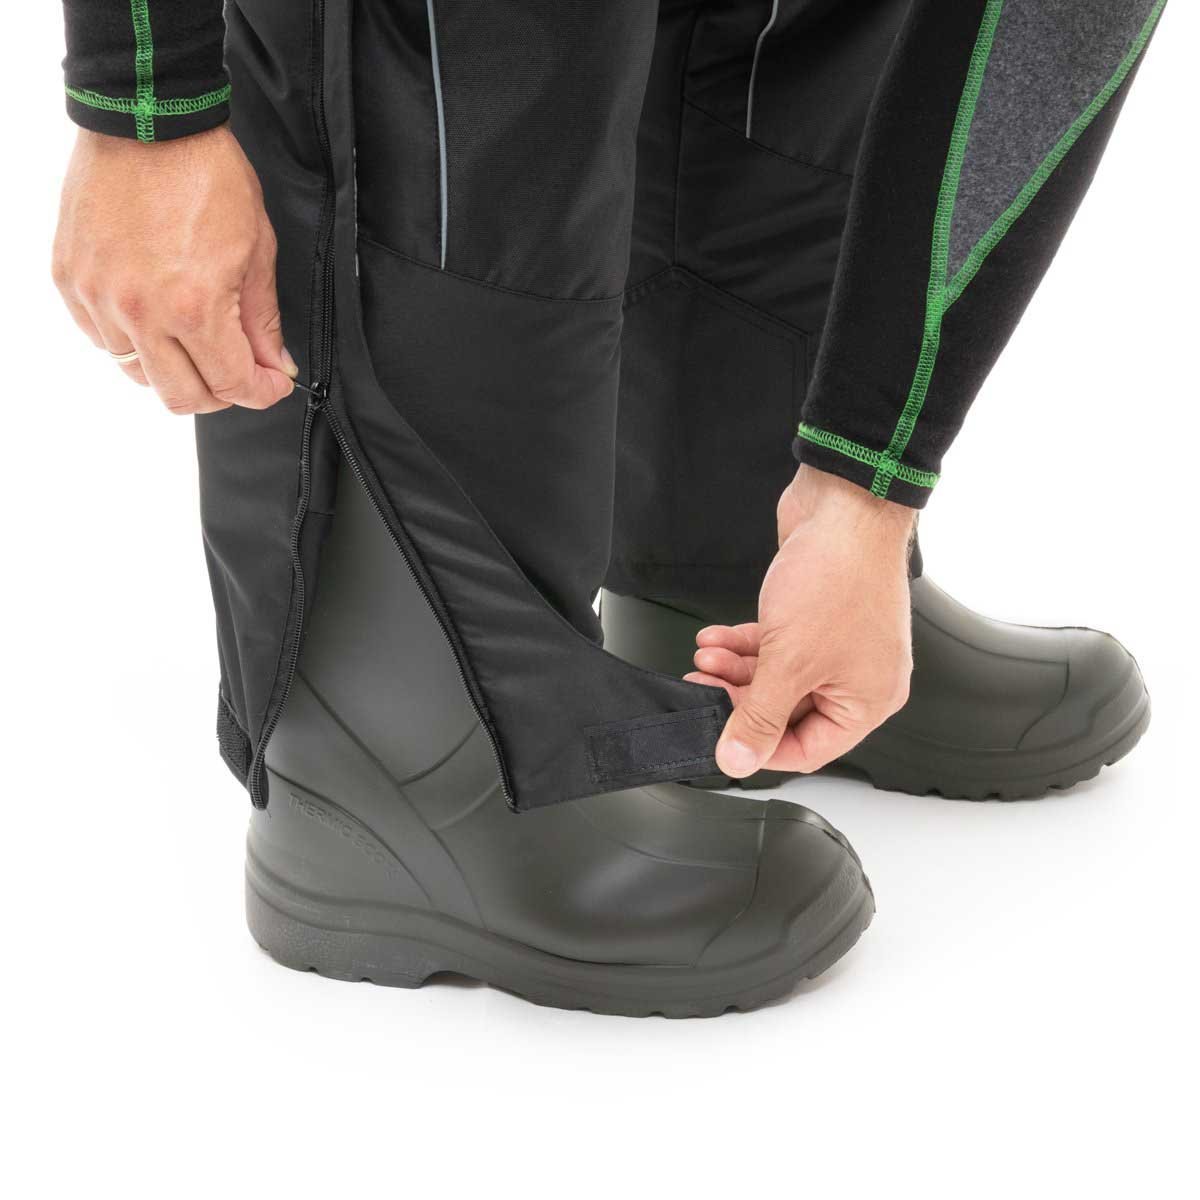 Angler Pro Bibs protect your boots from moisture